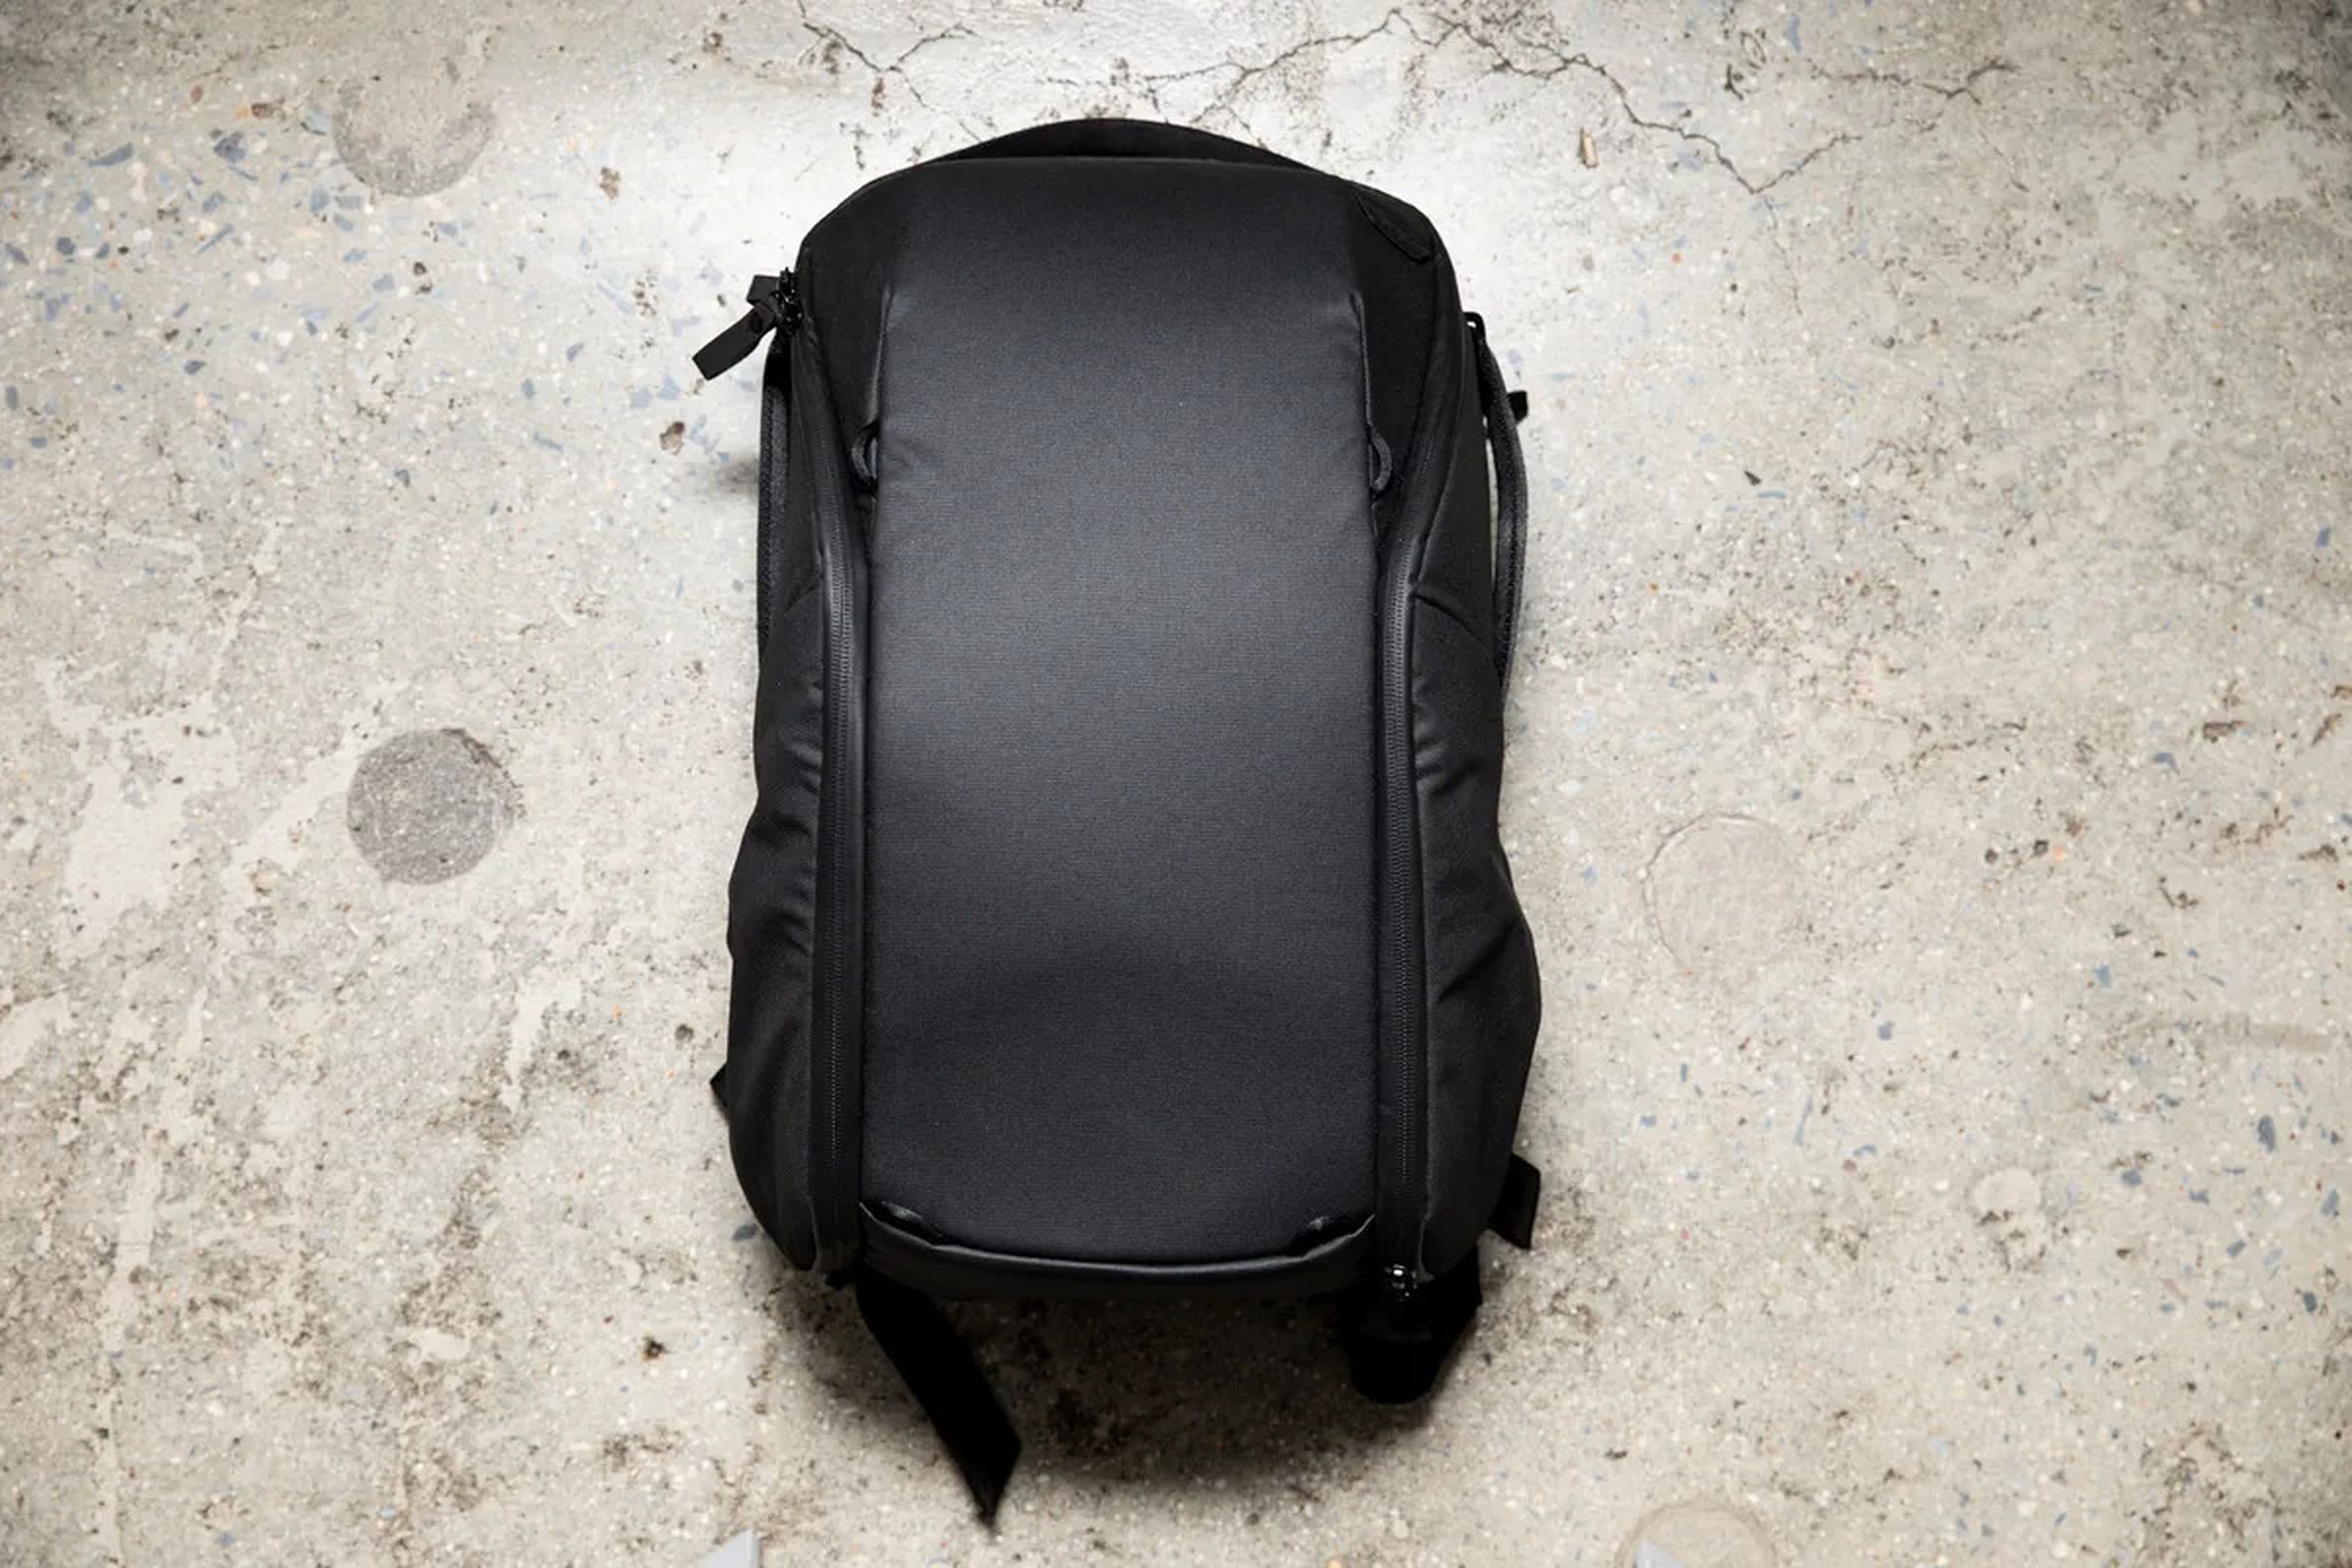 A photo of the black Peak Design Everyday Backpack face-up resting on the floor.